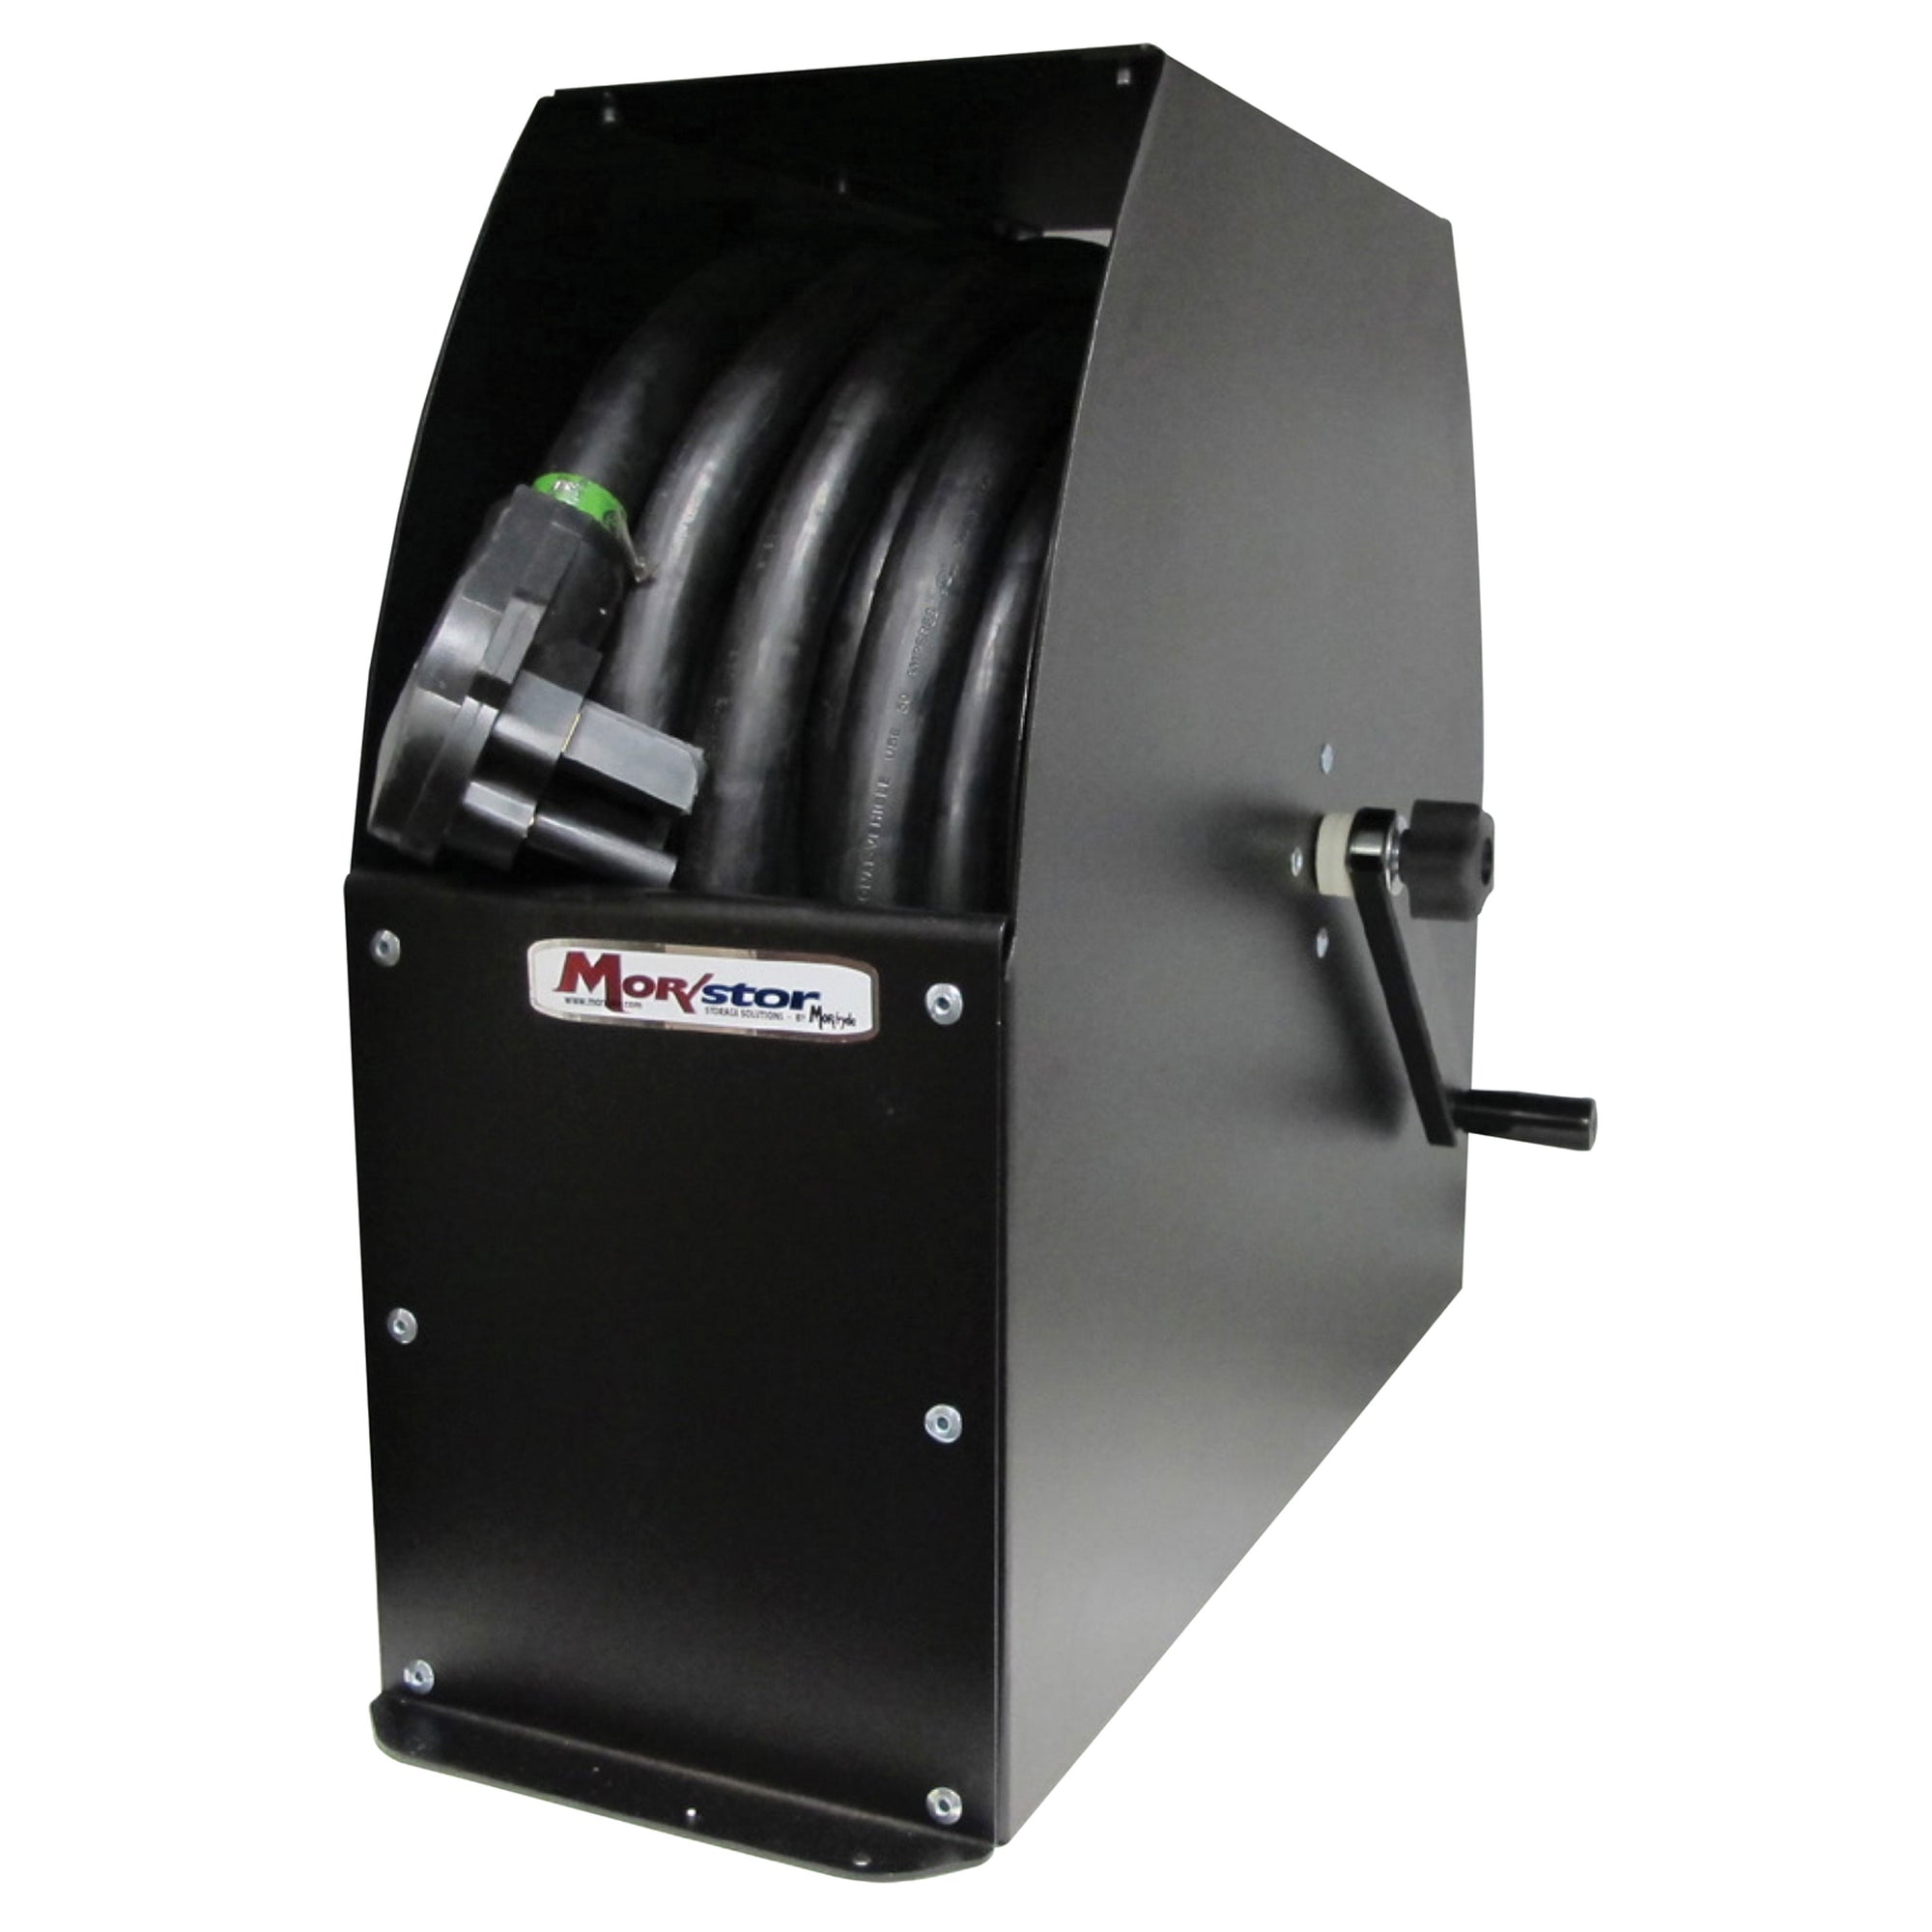 MORryde REEL56-001H Tall Easy Reel Spooler for Hassle-Free Power Cord Storage